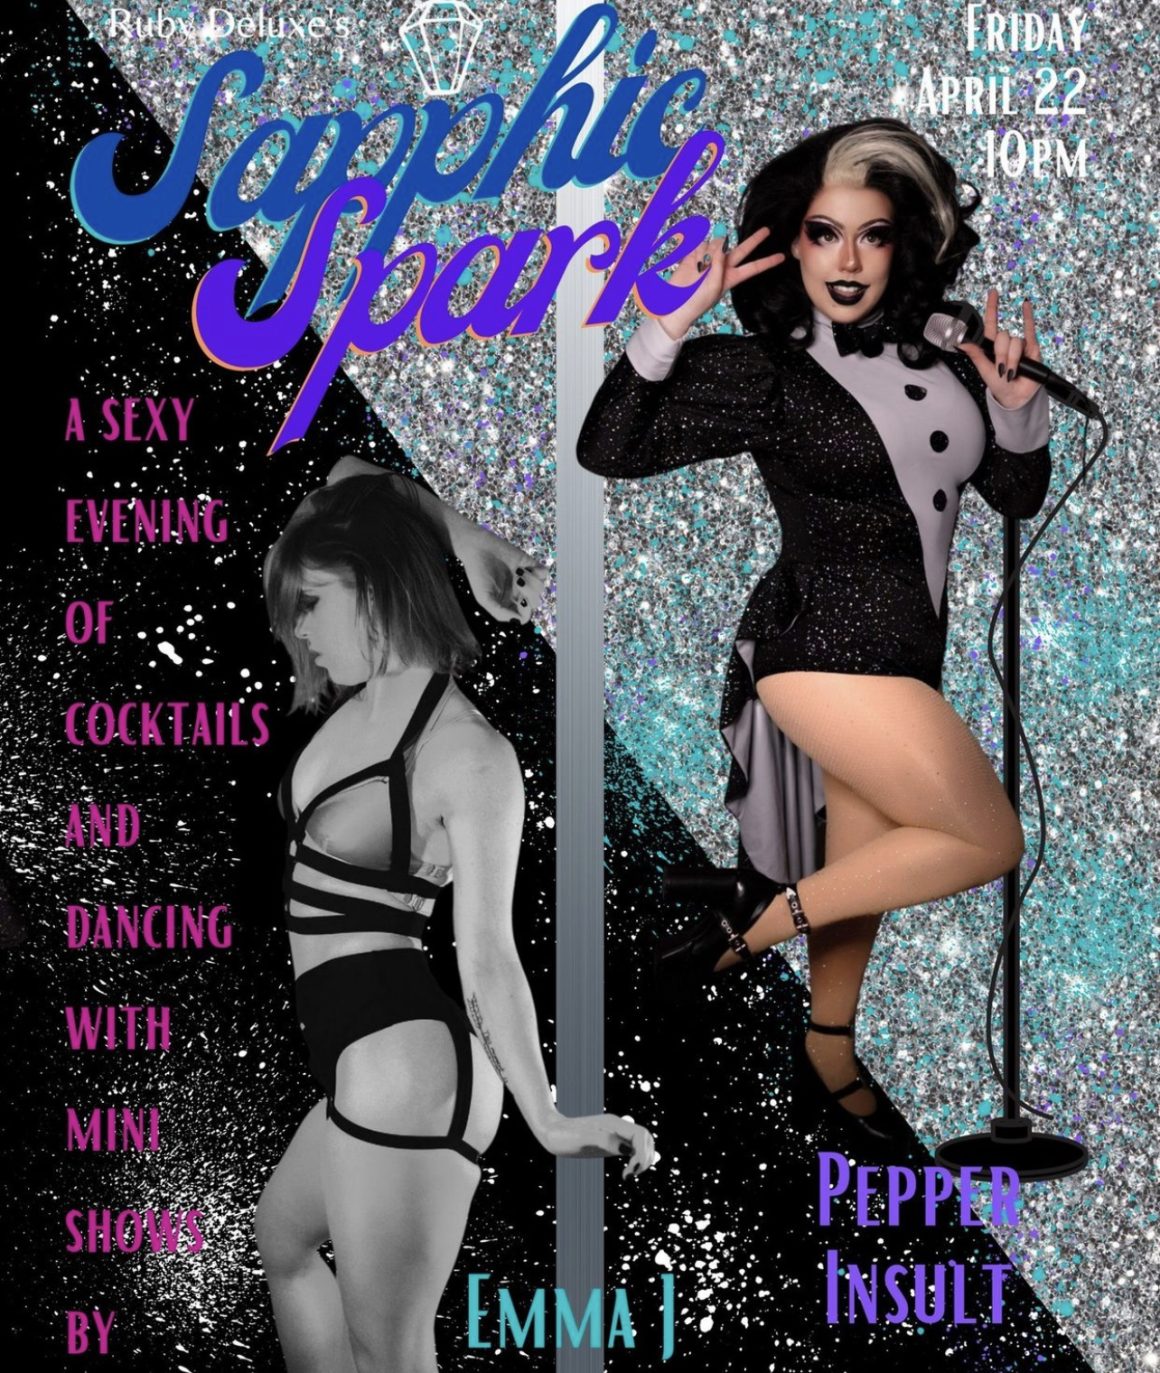 Sapphic Spark. A sexy night of dancing and cocktails.